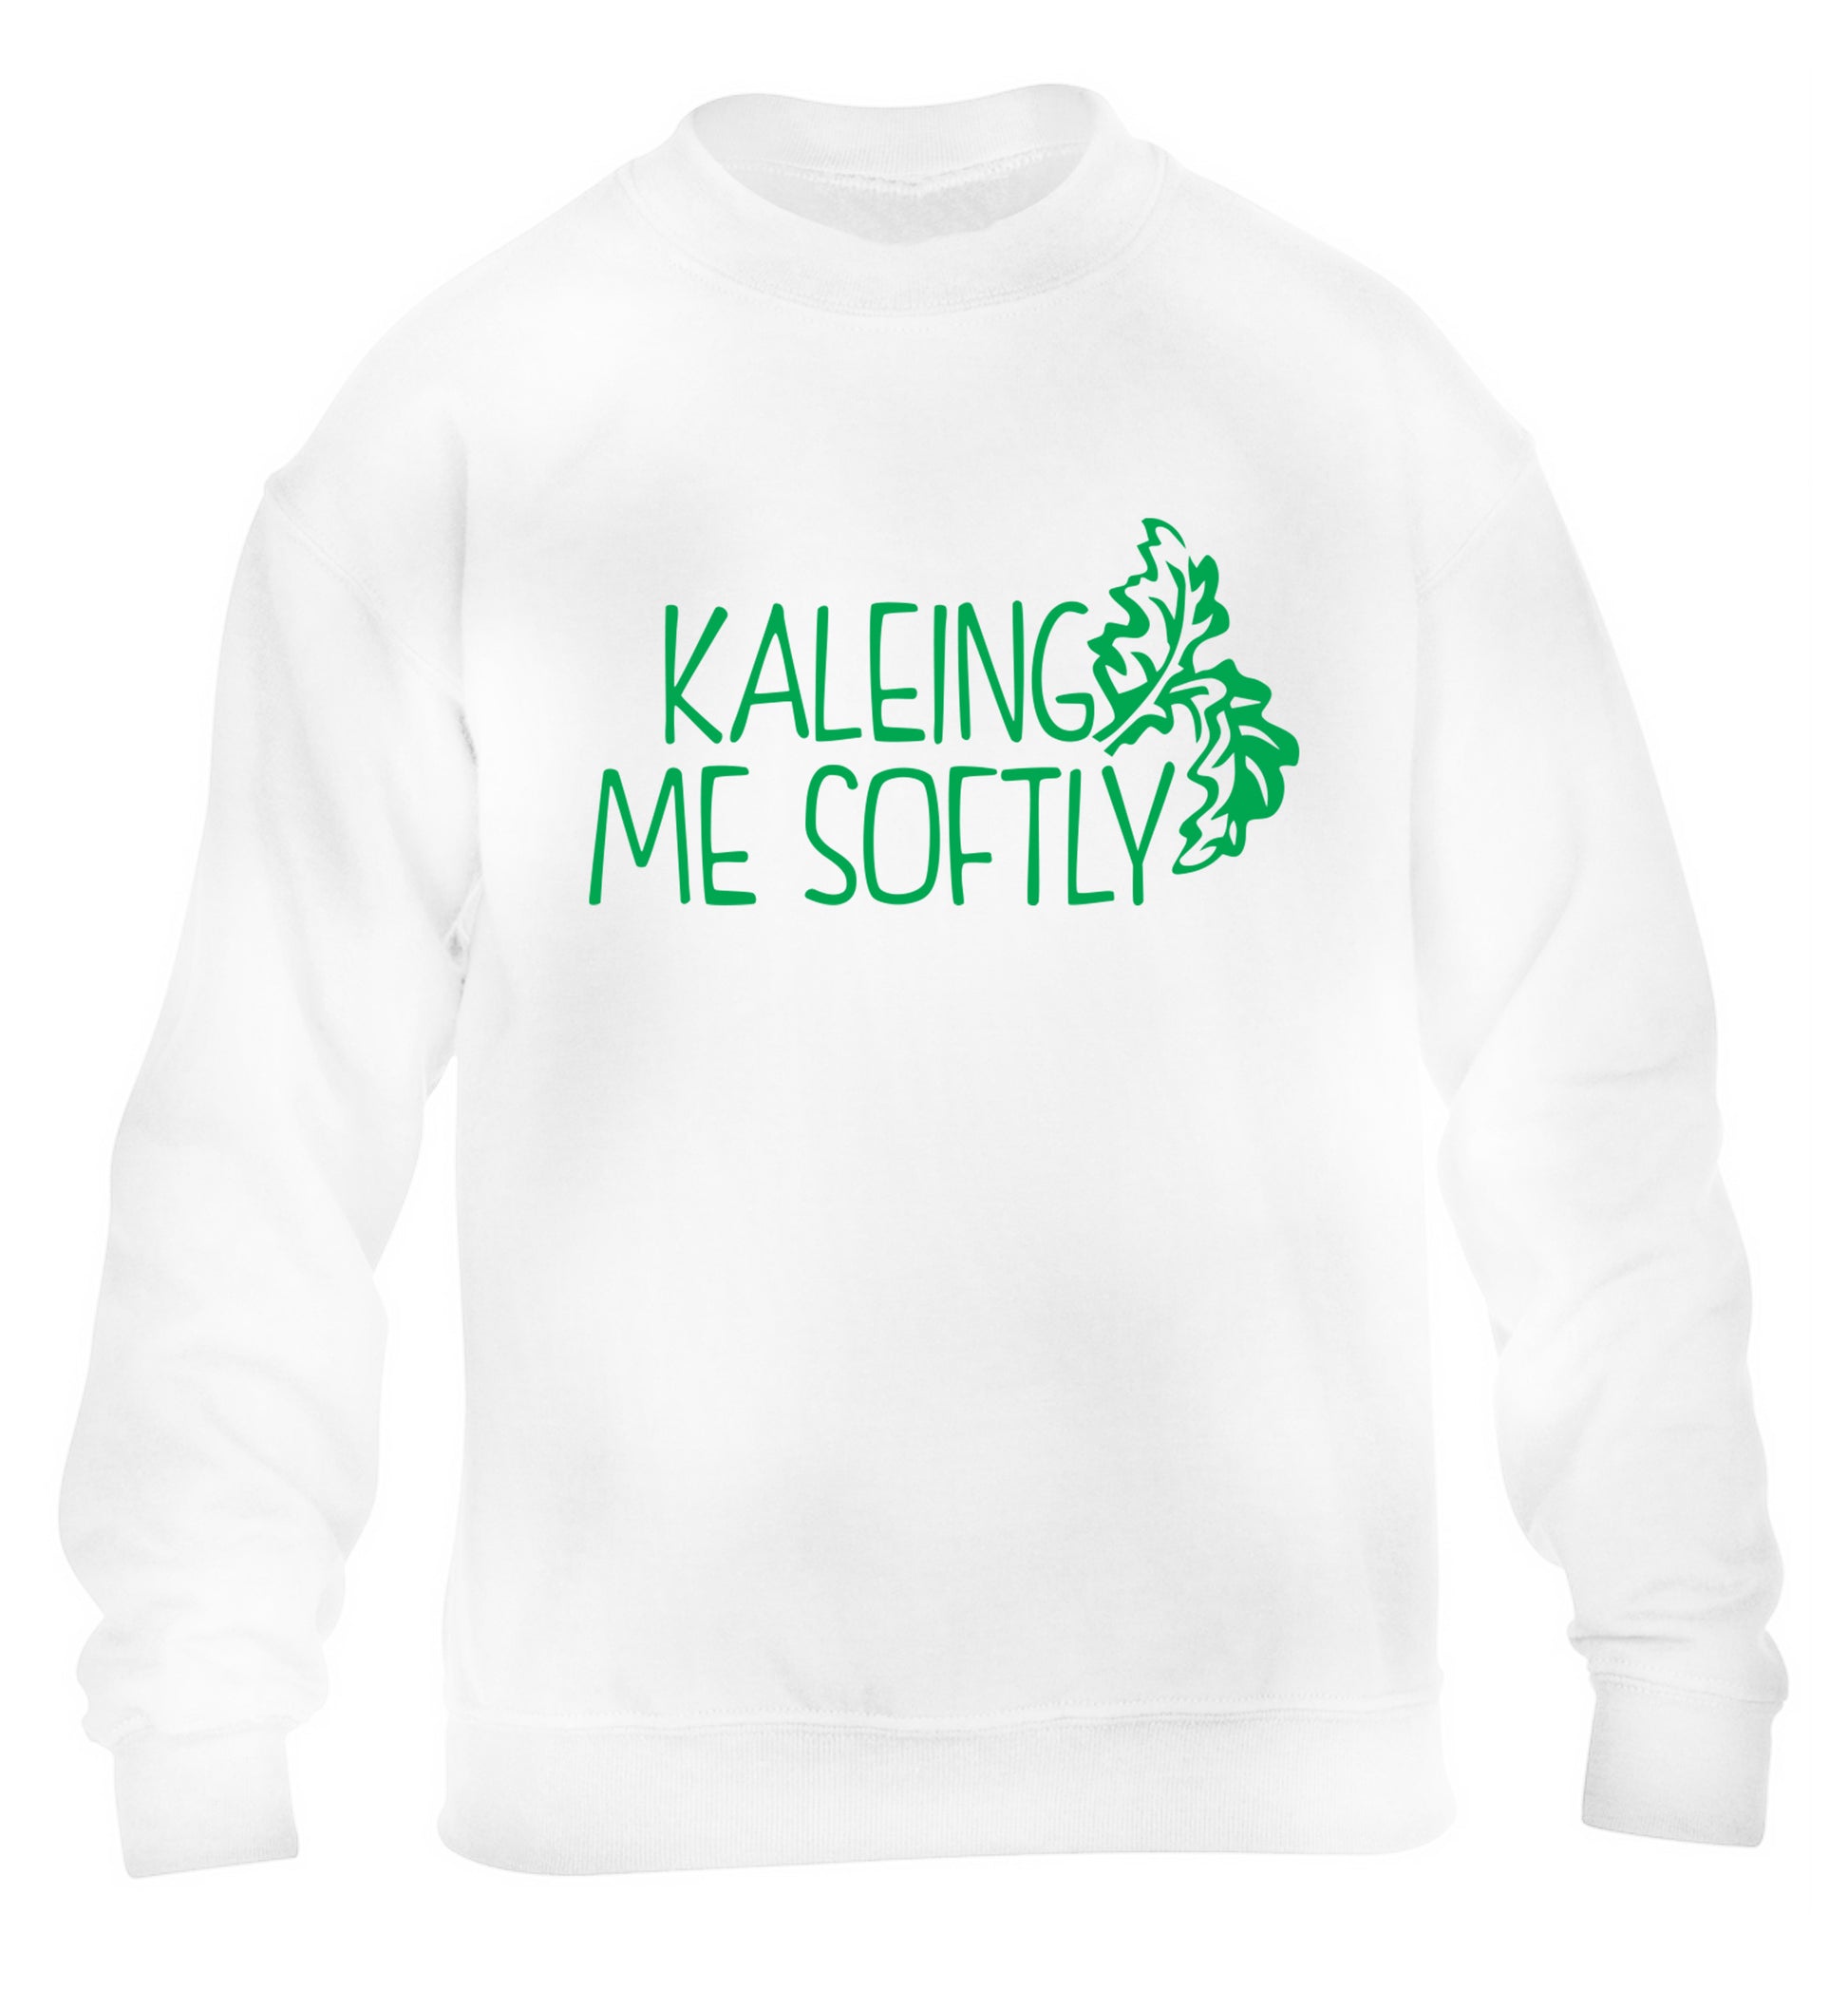 Kaleing me softly children's white sweater 12-14 Years